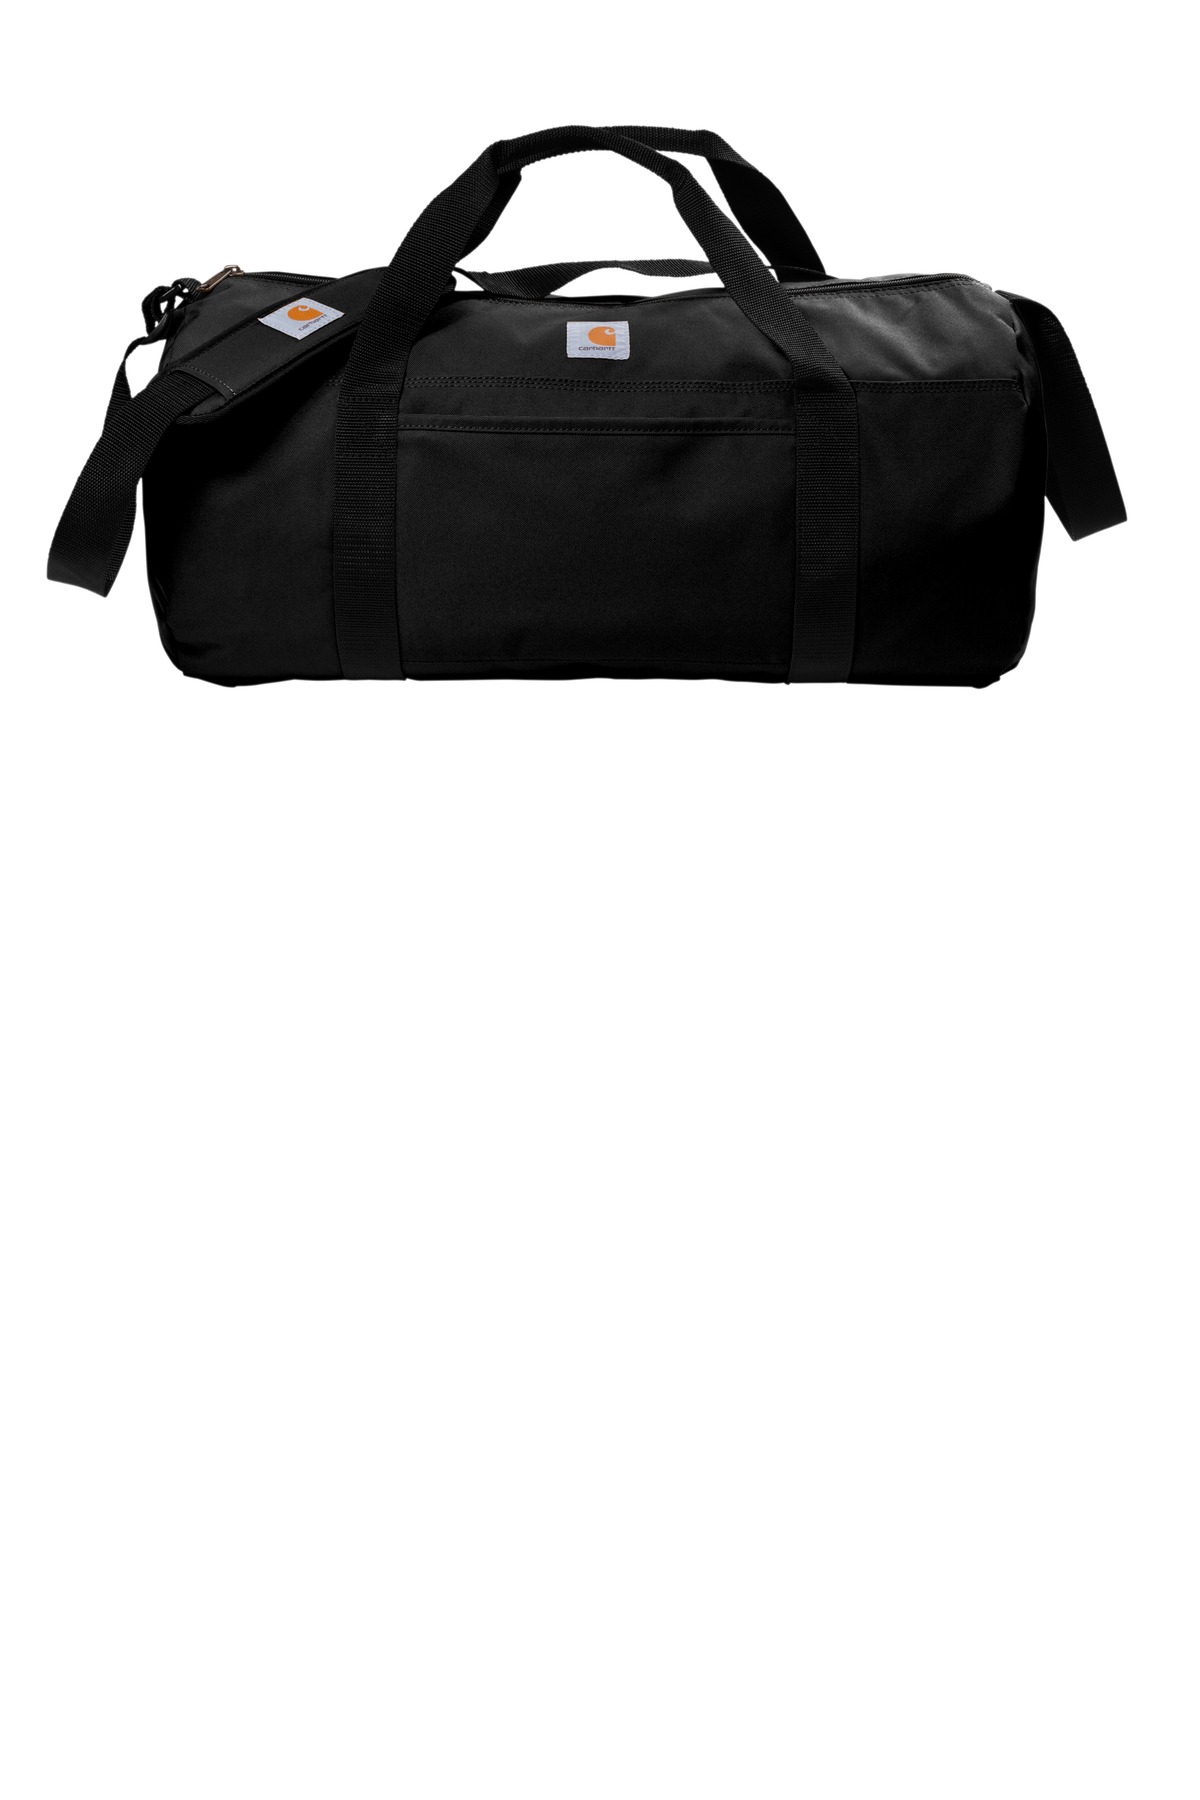 Carhartt Canvas Packable Duffel with Pouch-